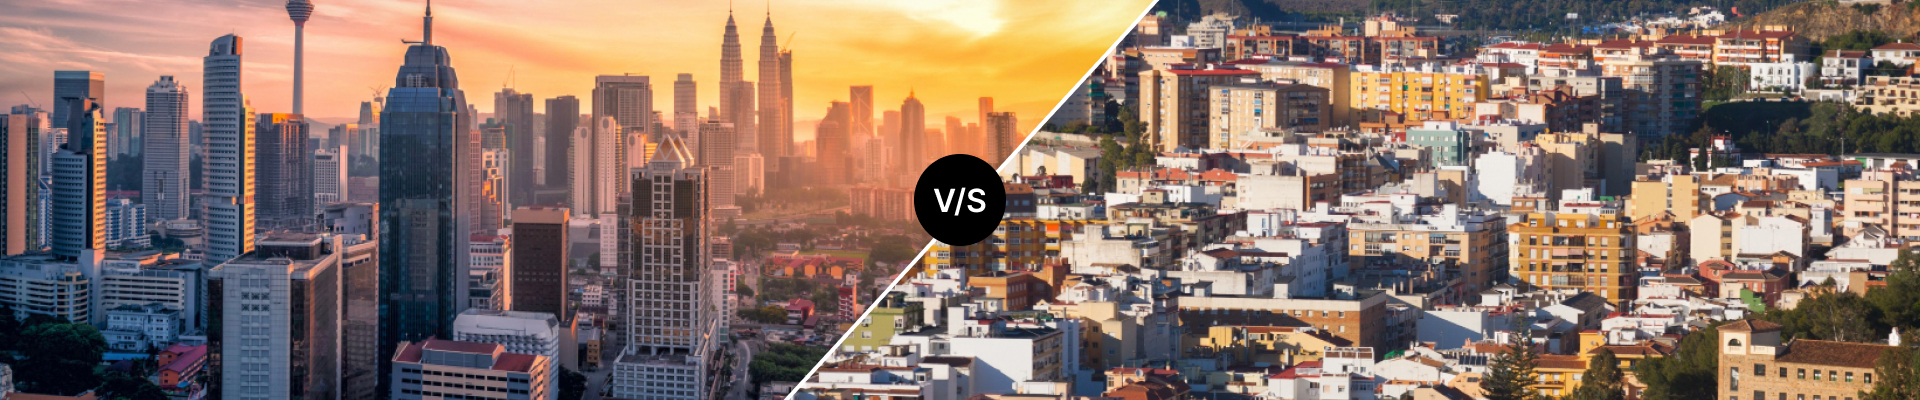 City vs. Suburbs: Which is Right for You